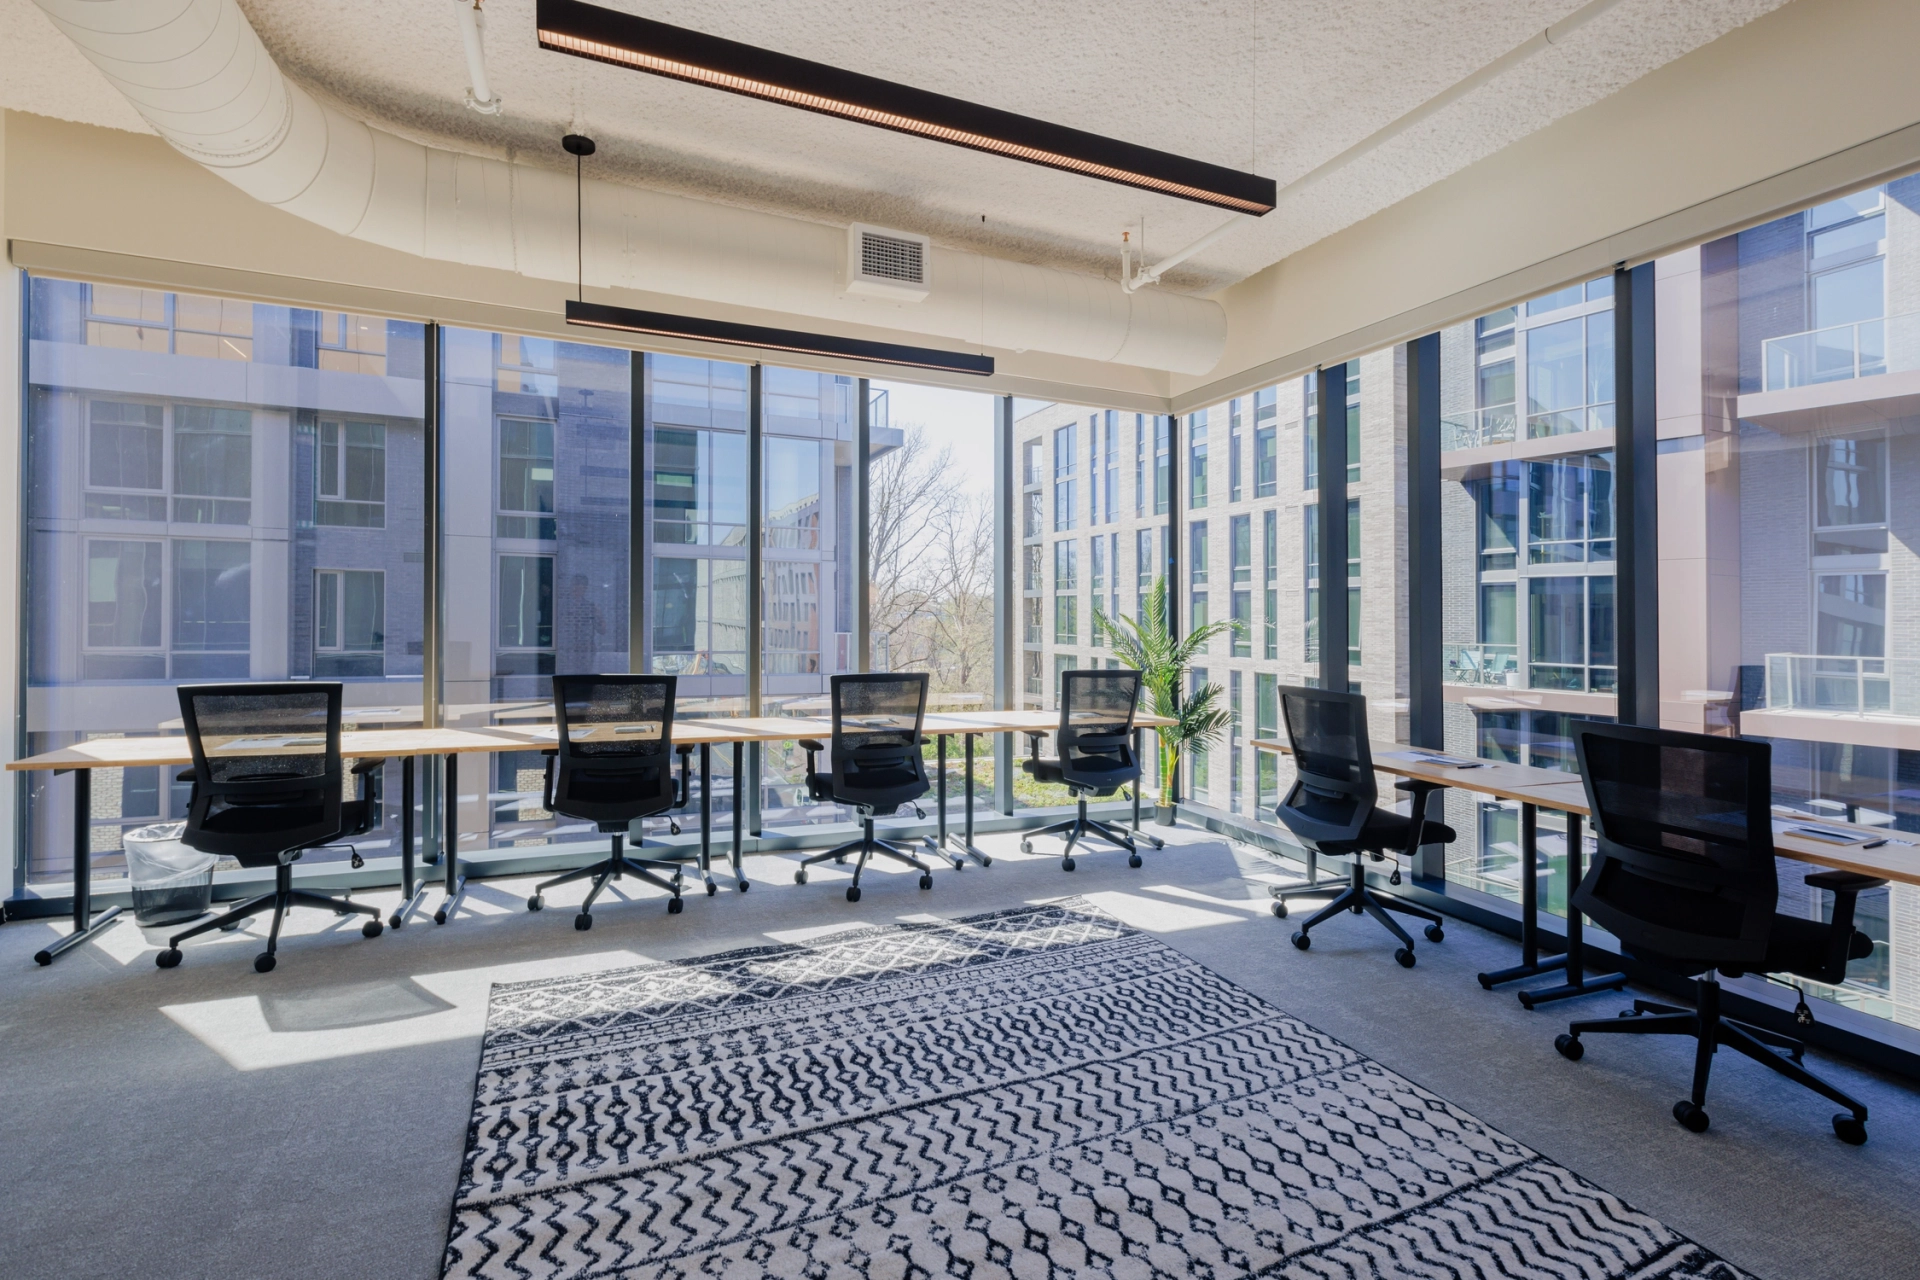 An open Washington office with large windows and workspace chairs.